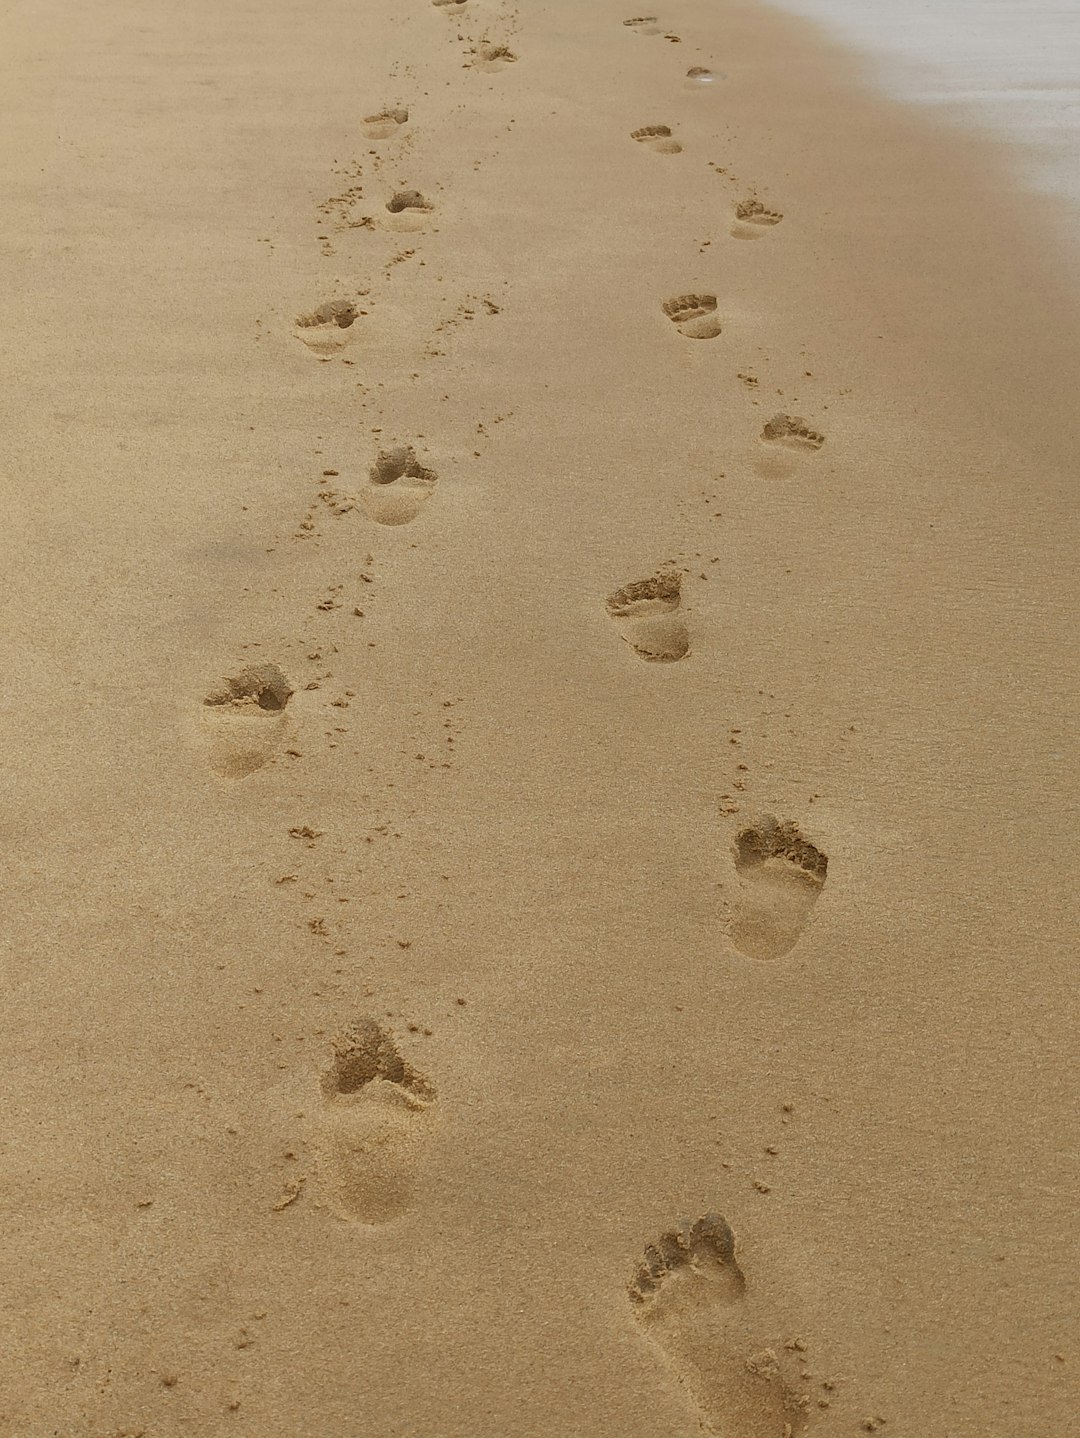 Footprints In Sand Pictures | Download Free Images on Unsplash